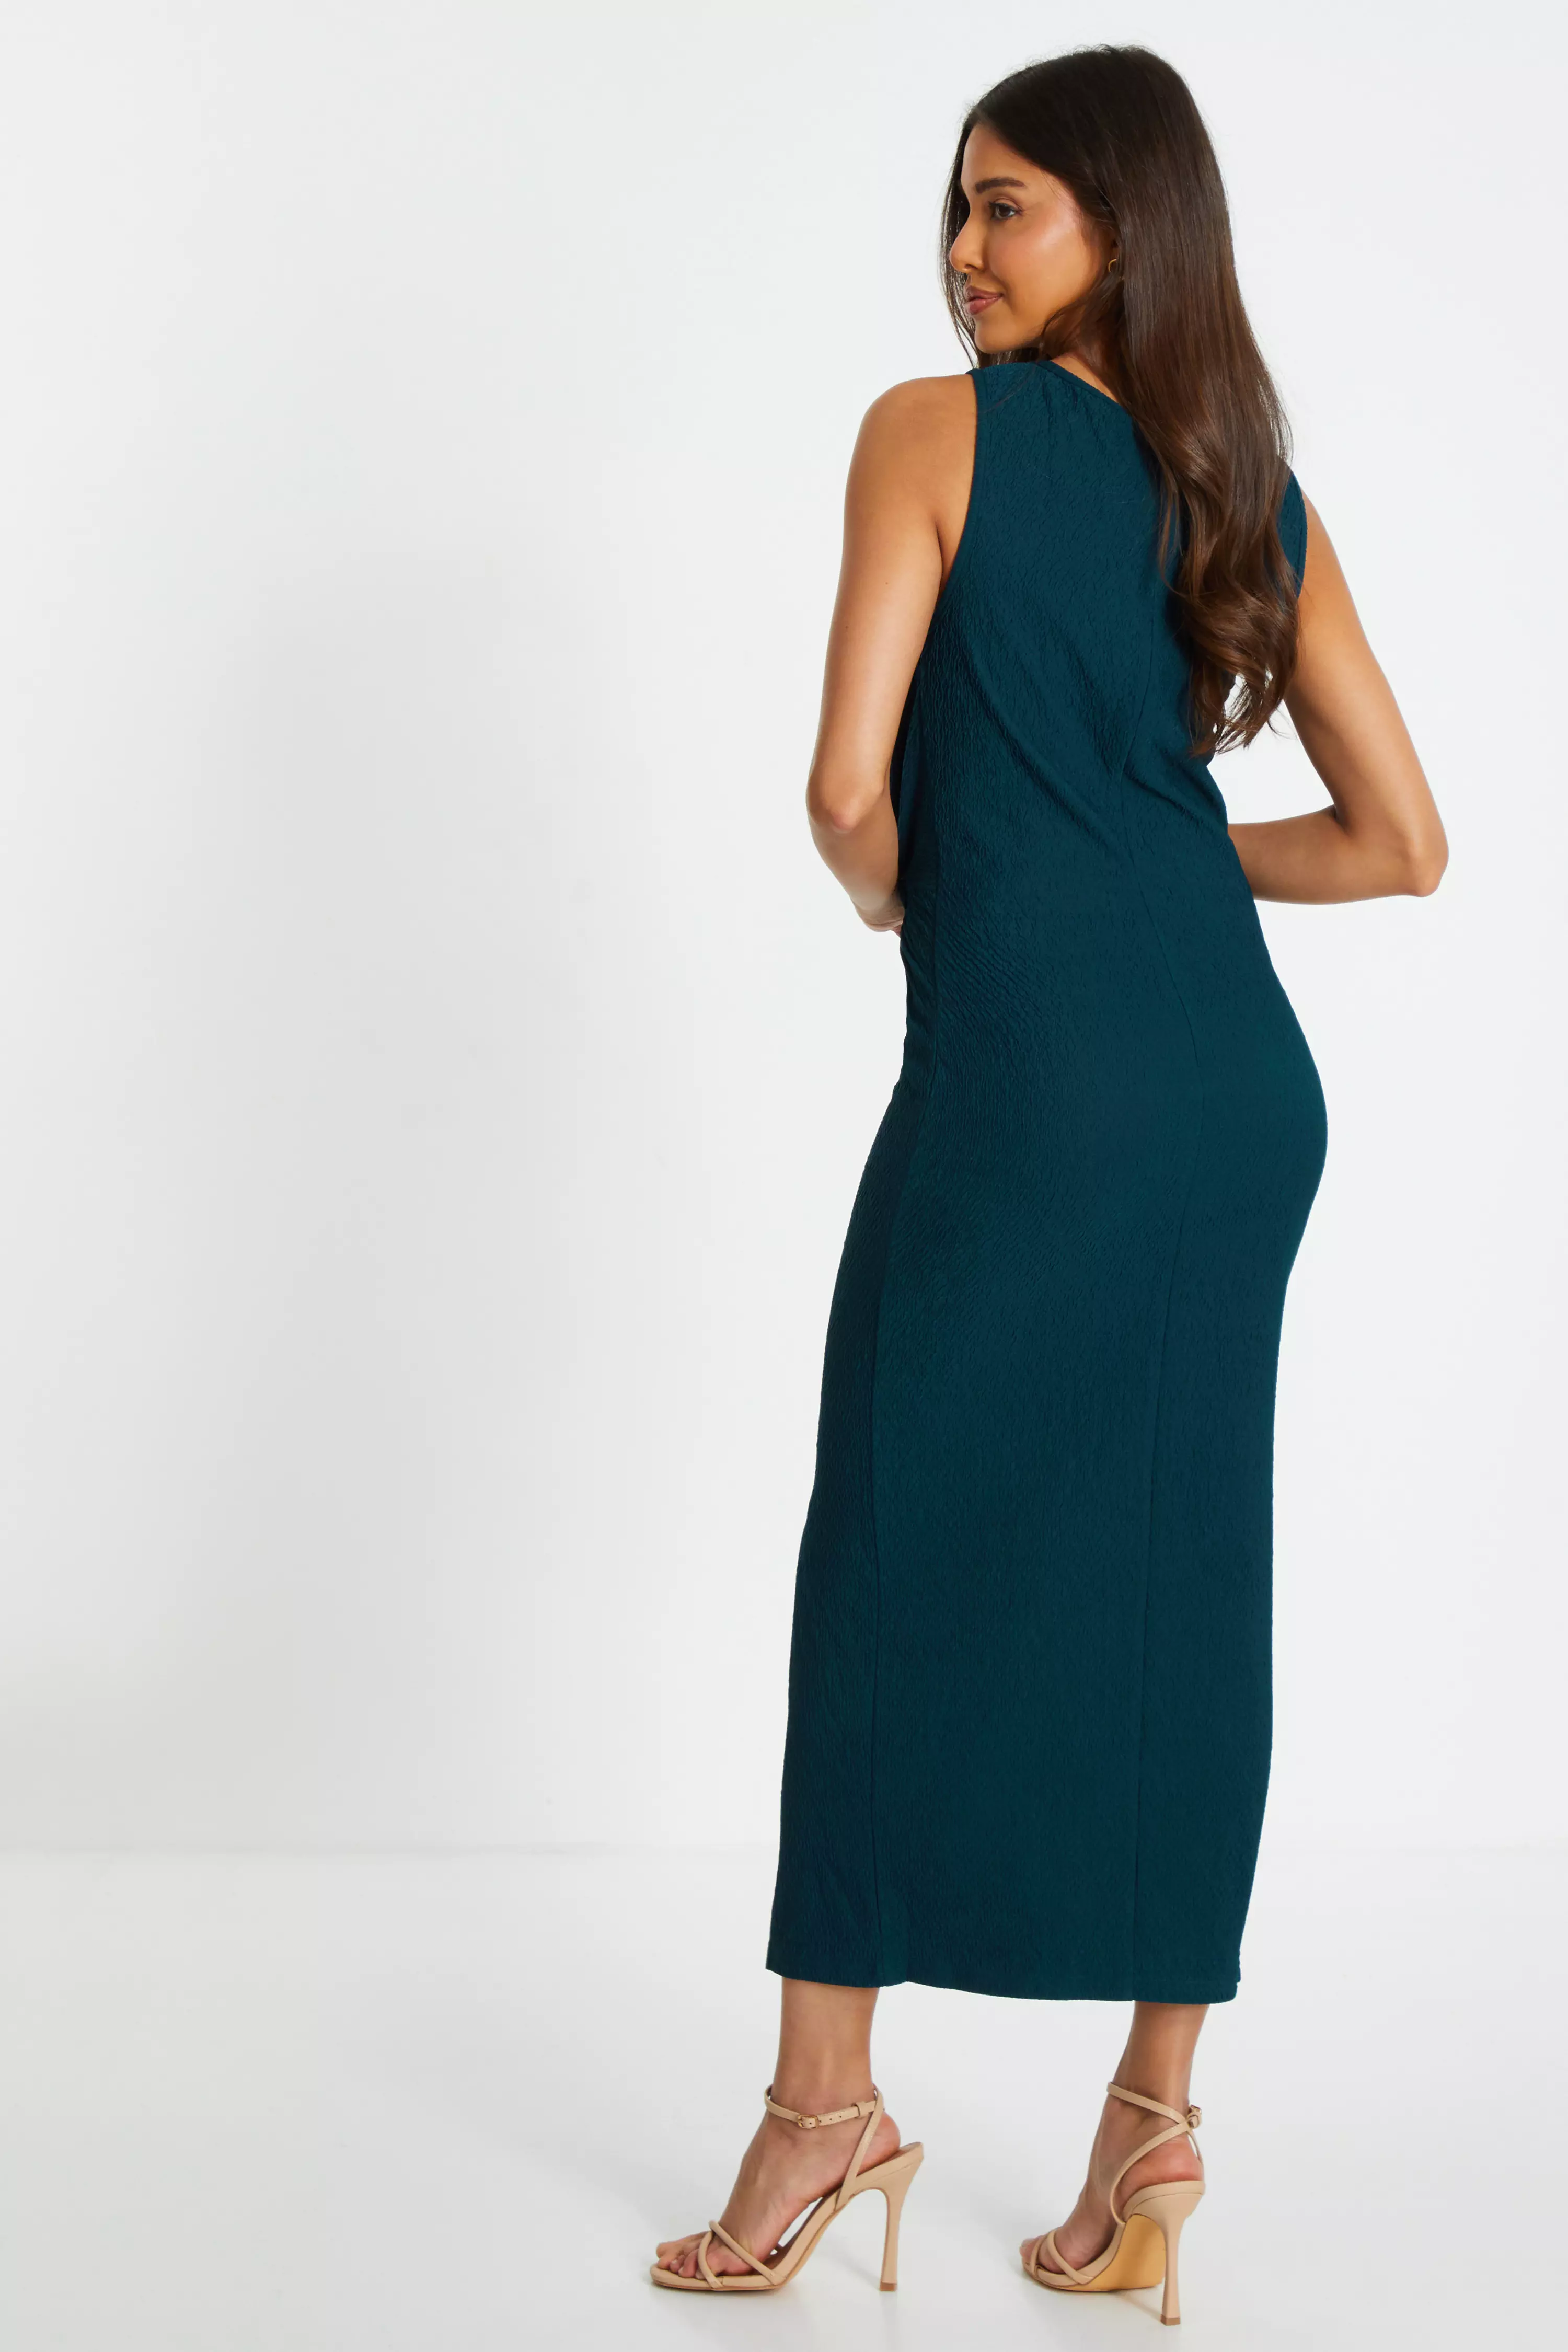 Teal Sleeveless Ruched Midaxi Dress